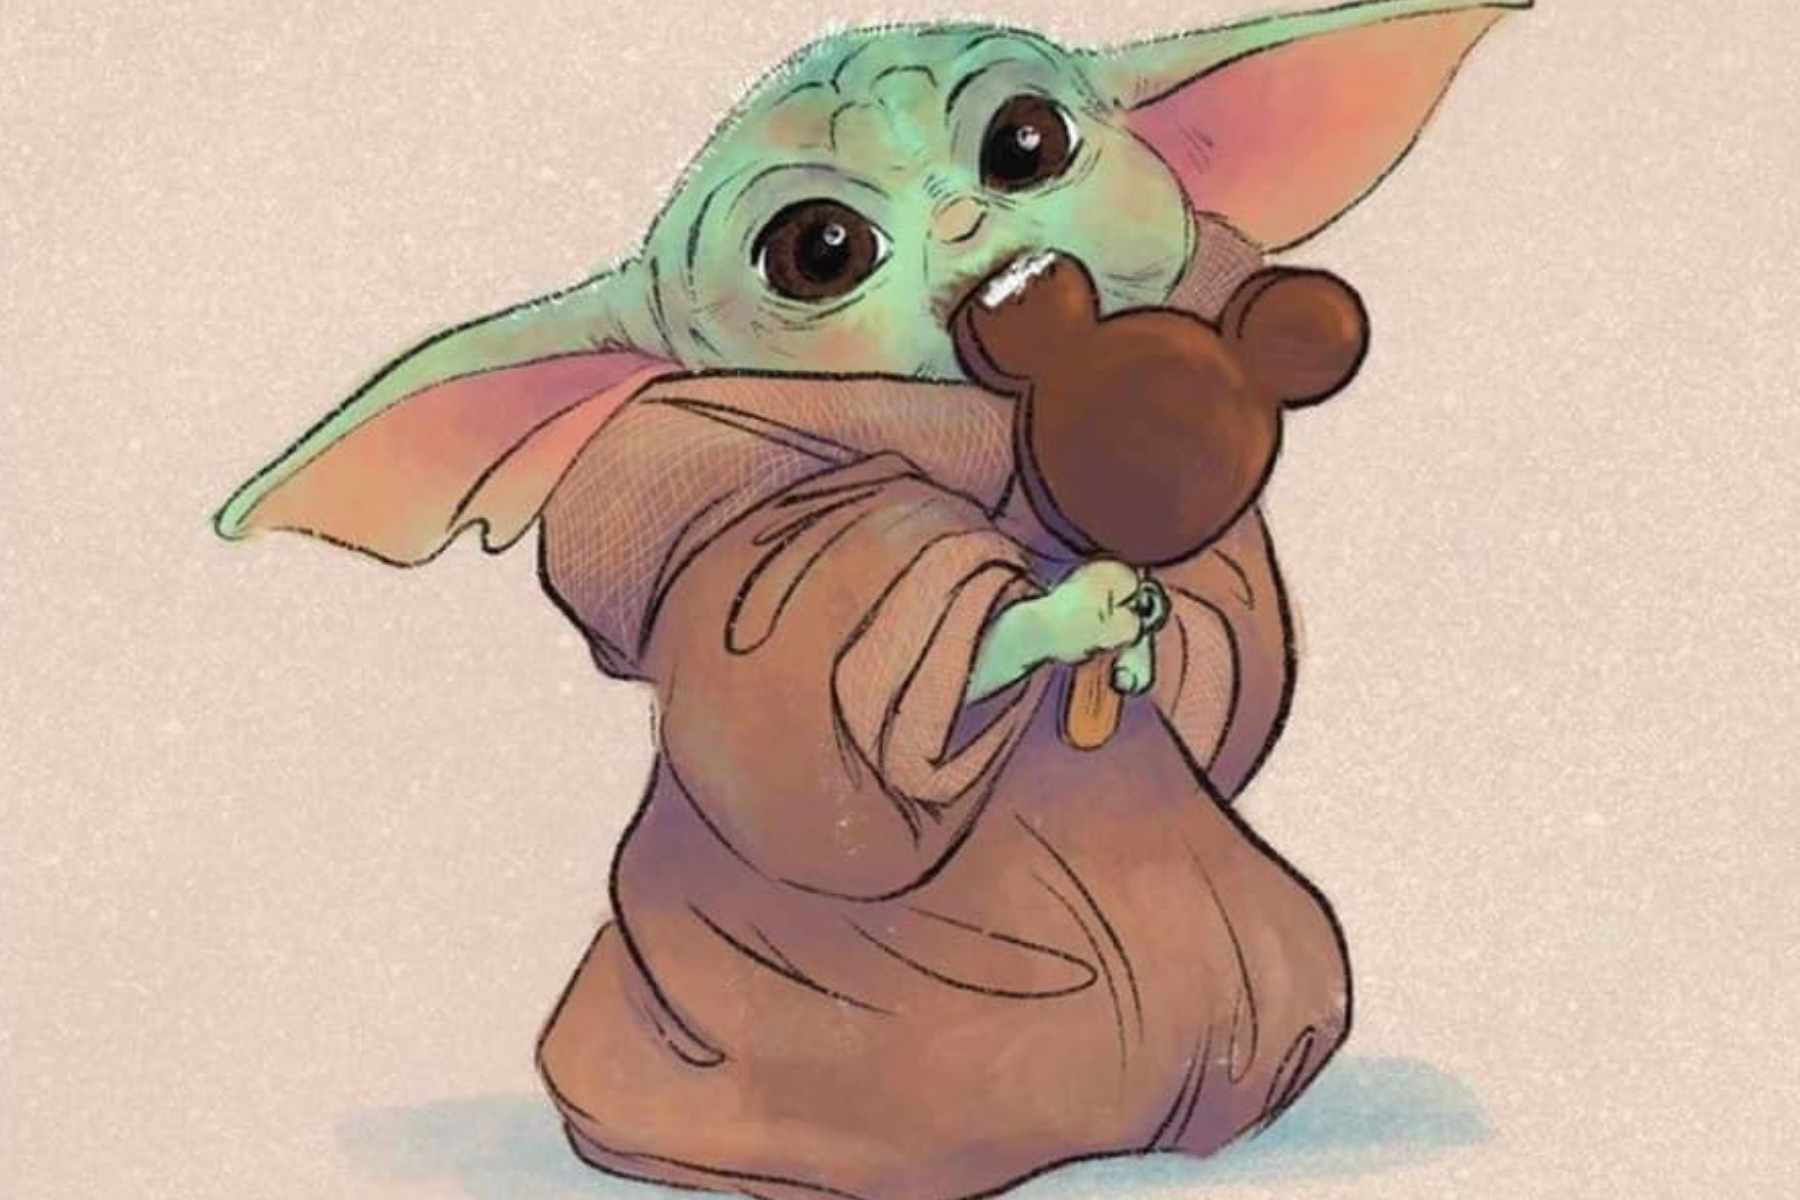 Baby Yoda is eating a brown candy